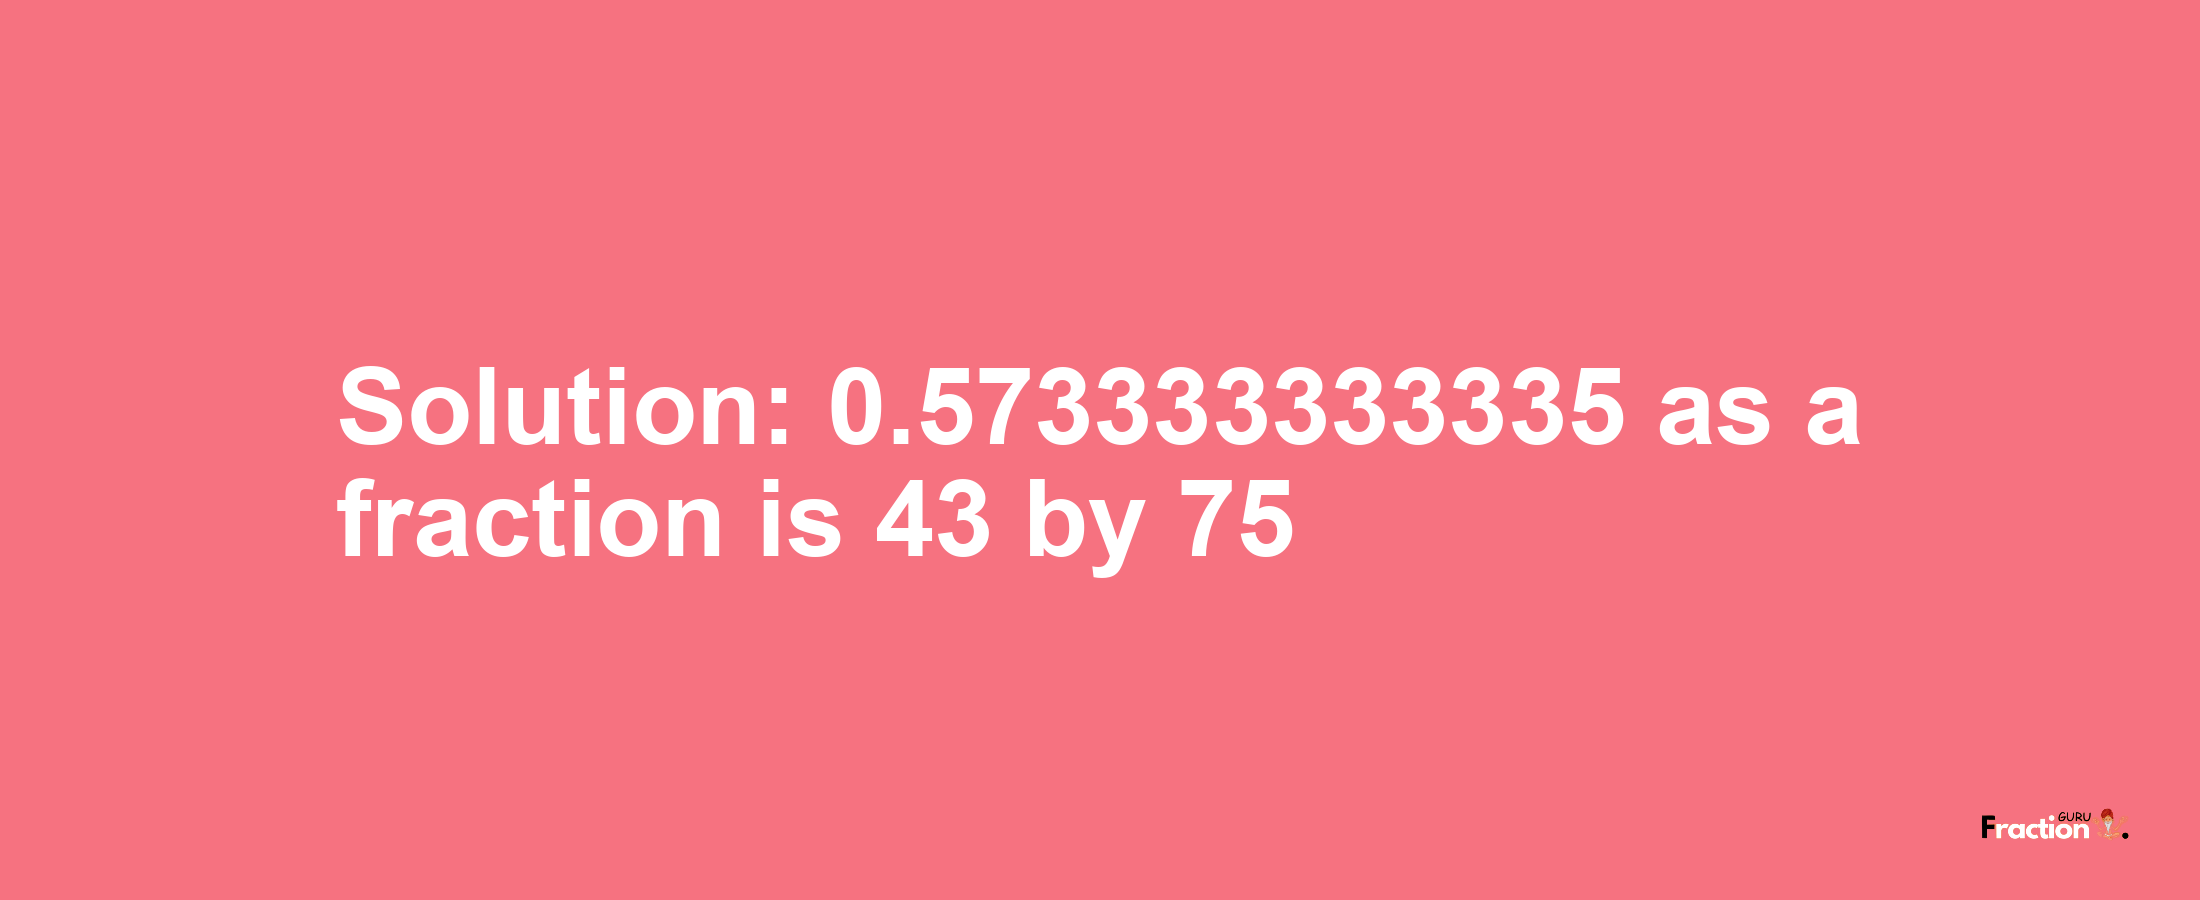 Solution:0.573333333335 as a fraction is 43/75